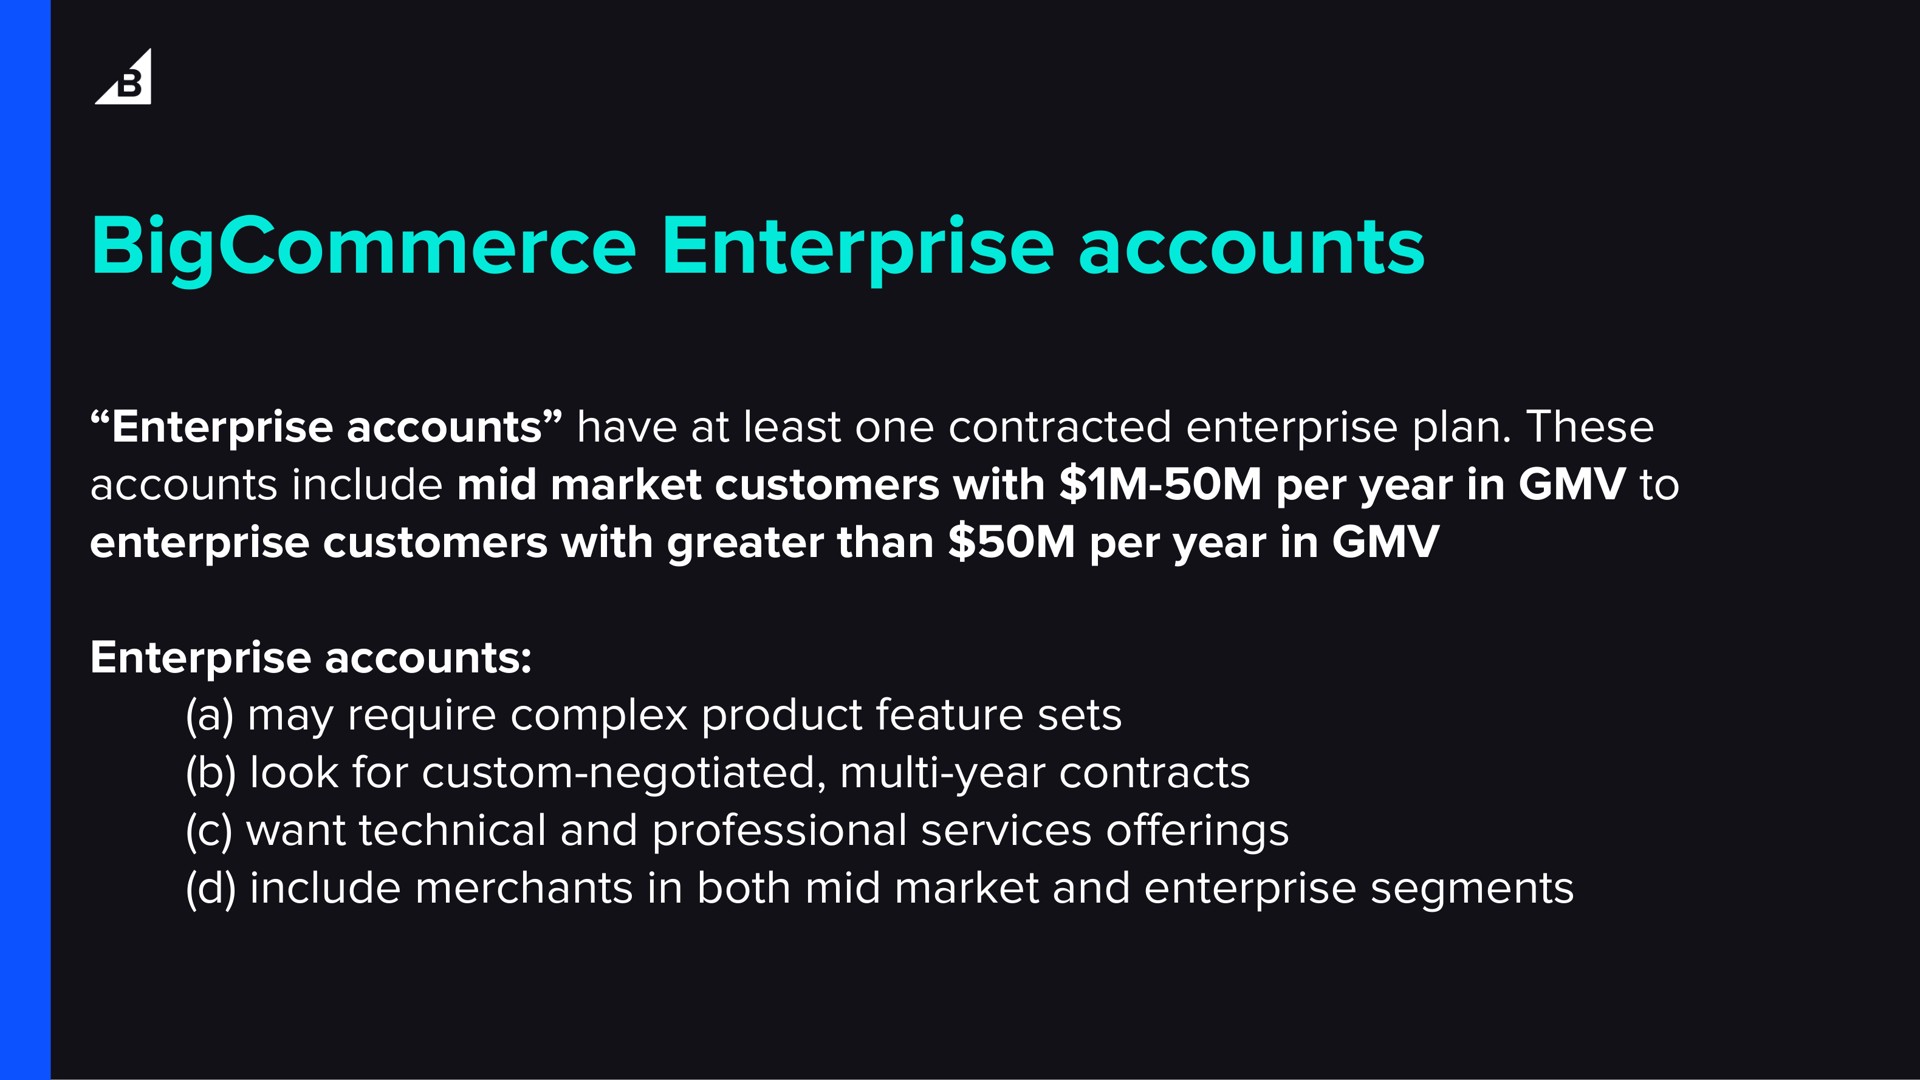 enterprise accounts enterprise accounts have at least one contracted enterprise plan these accounts include mid market customers with per year in to enterprise customers with greater than per year in enterprise accounts a may require complex product feature sets look for custom negotiated year contracts want technical and professional services include merchants in both mid market and enterprise segments offerings | BigCommerce